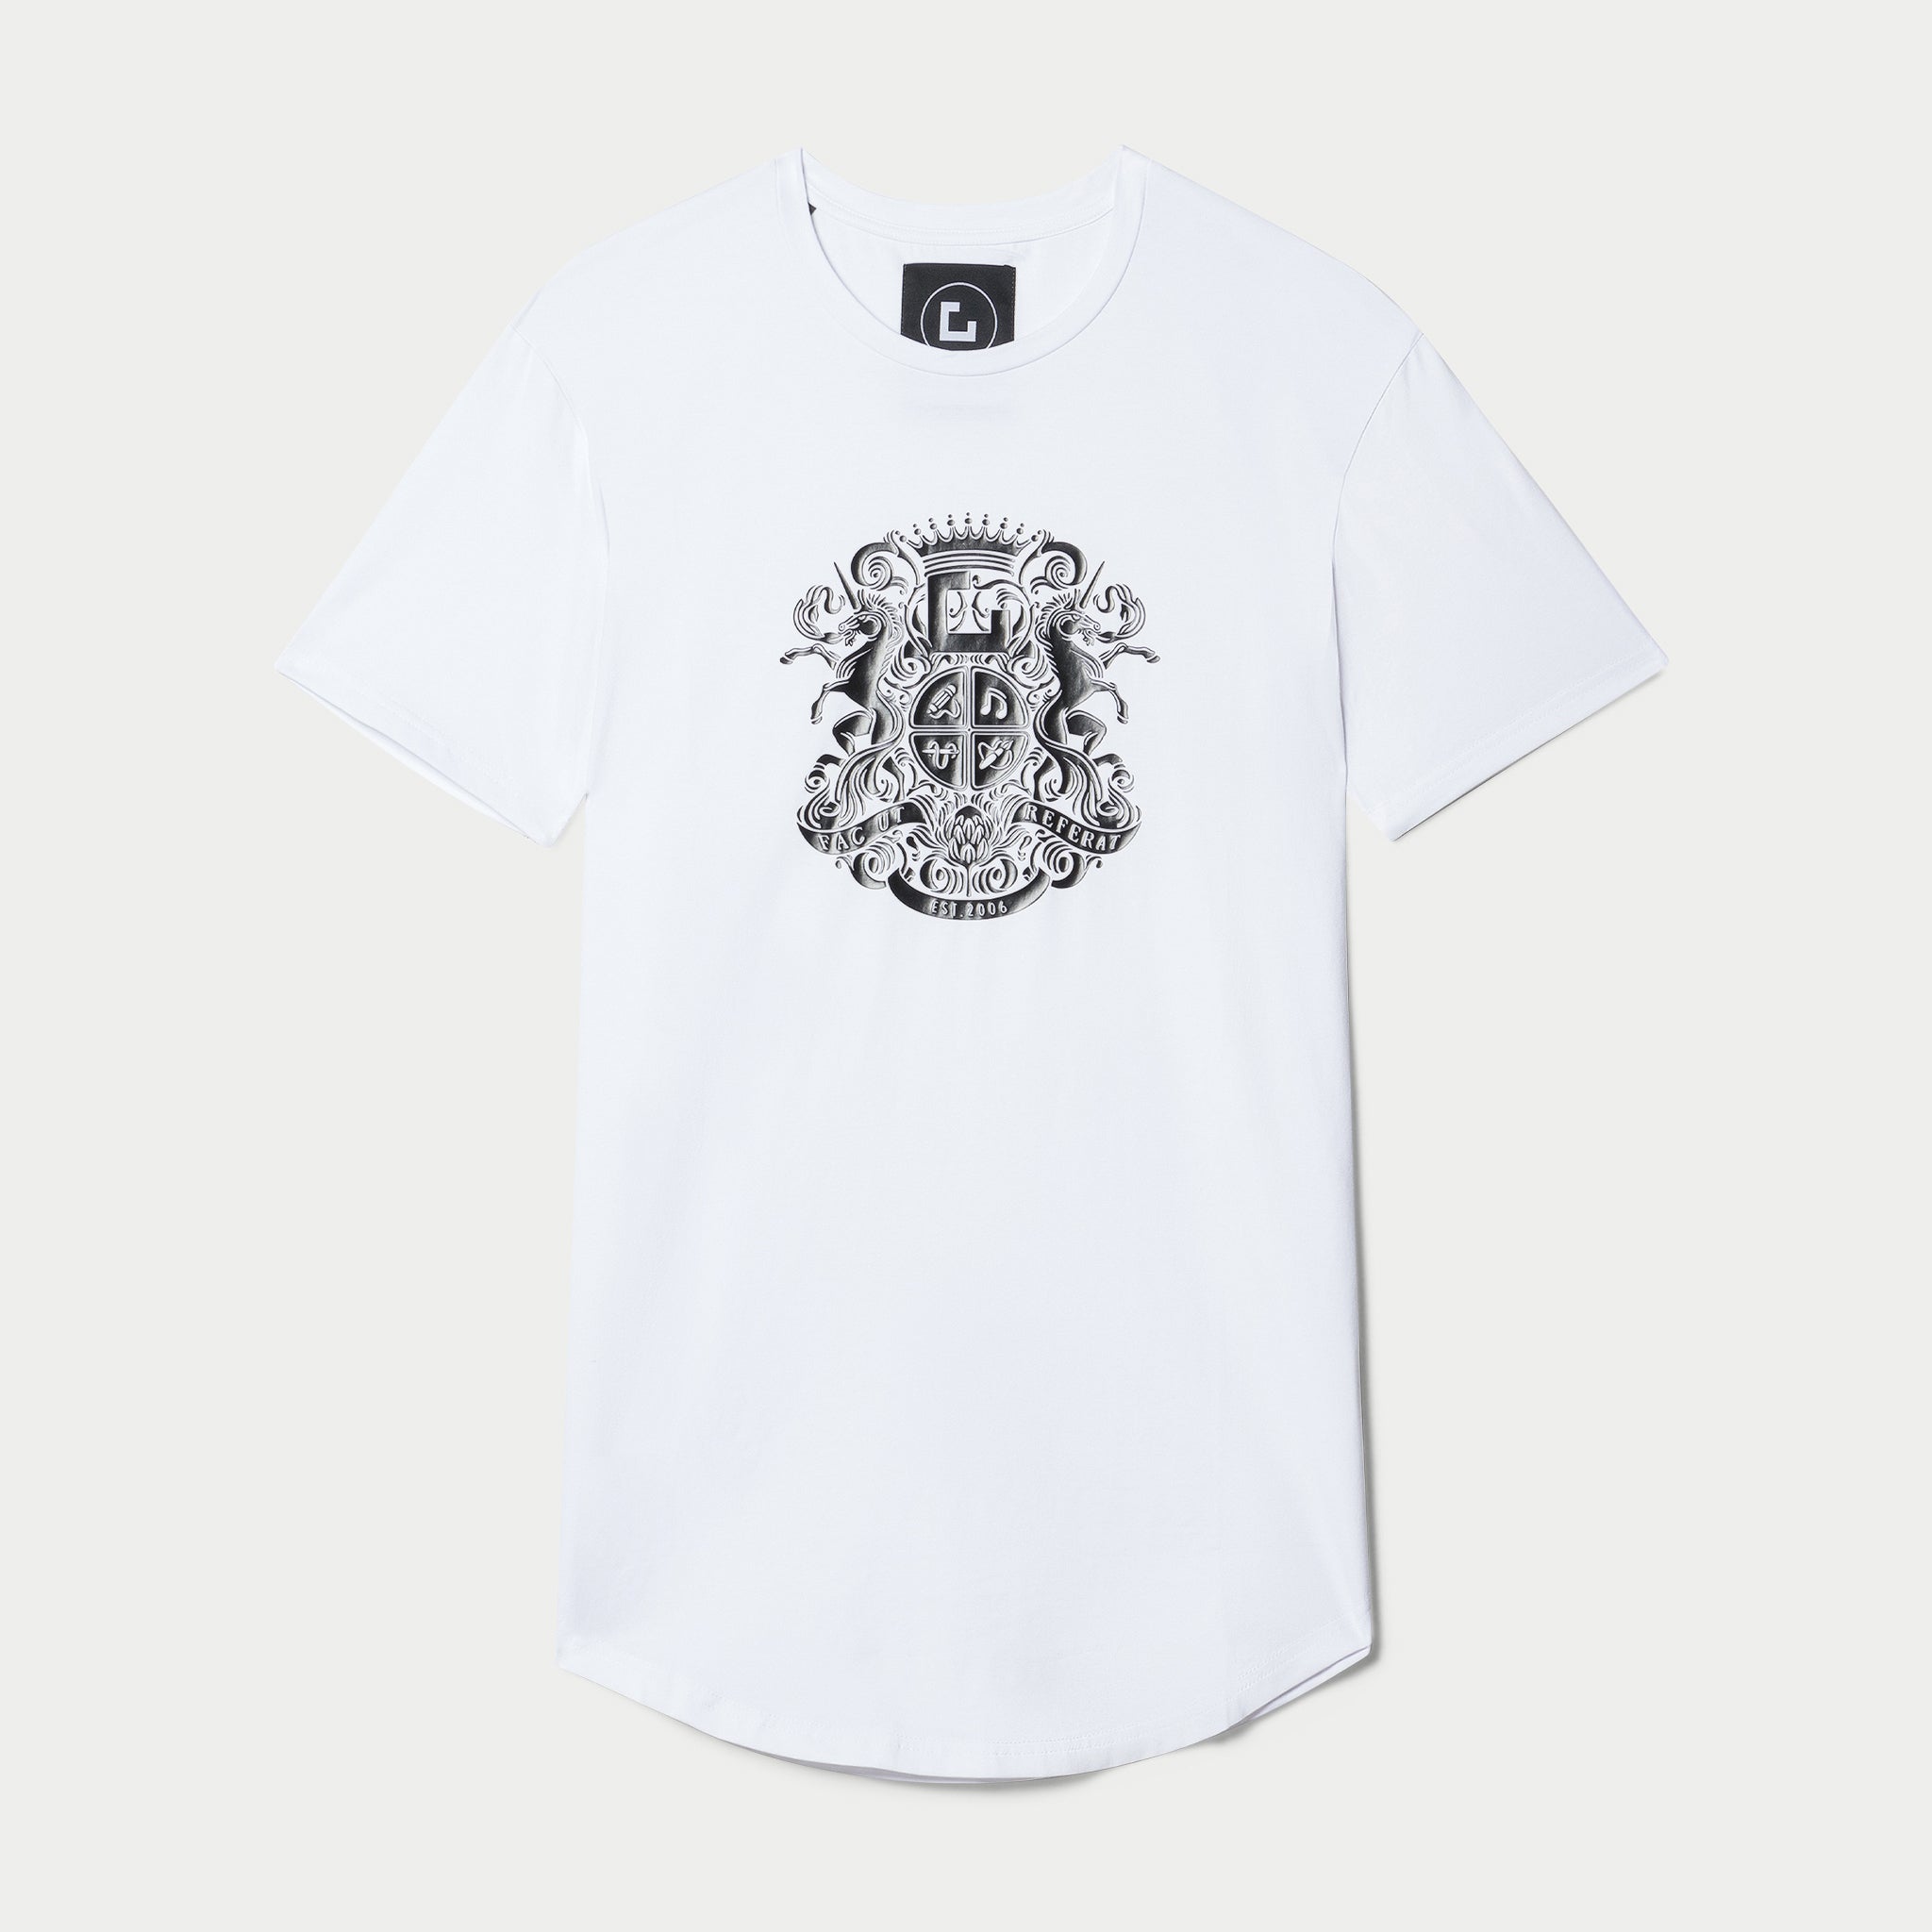 G Couture T-Shirt - White